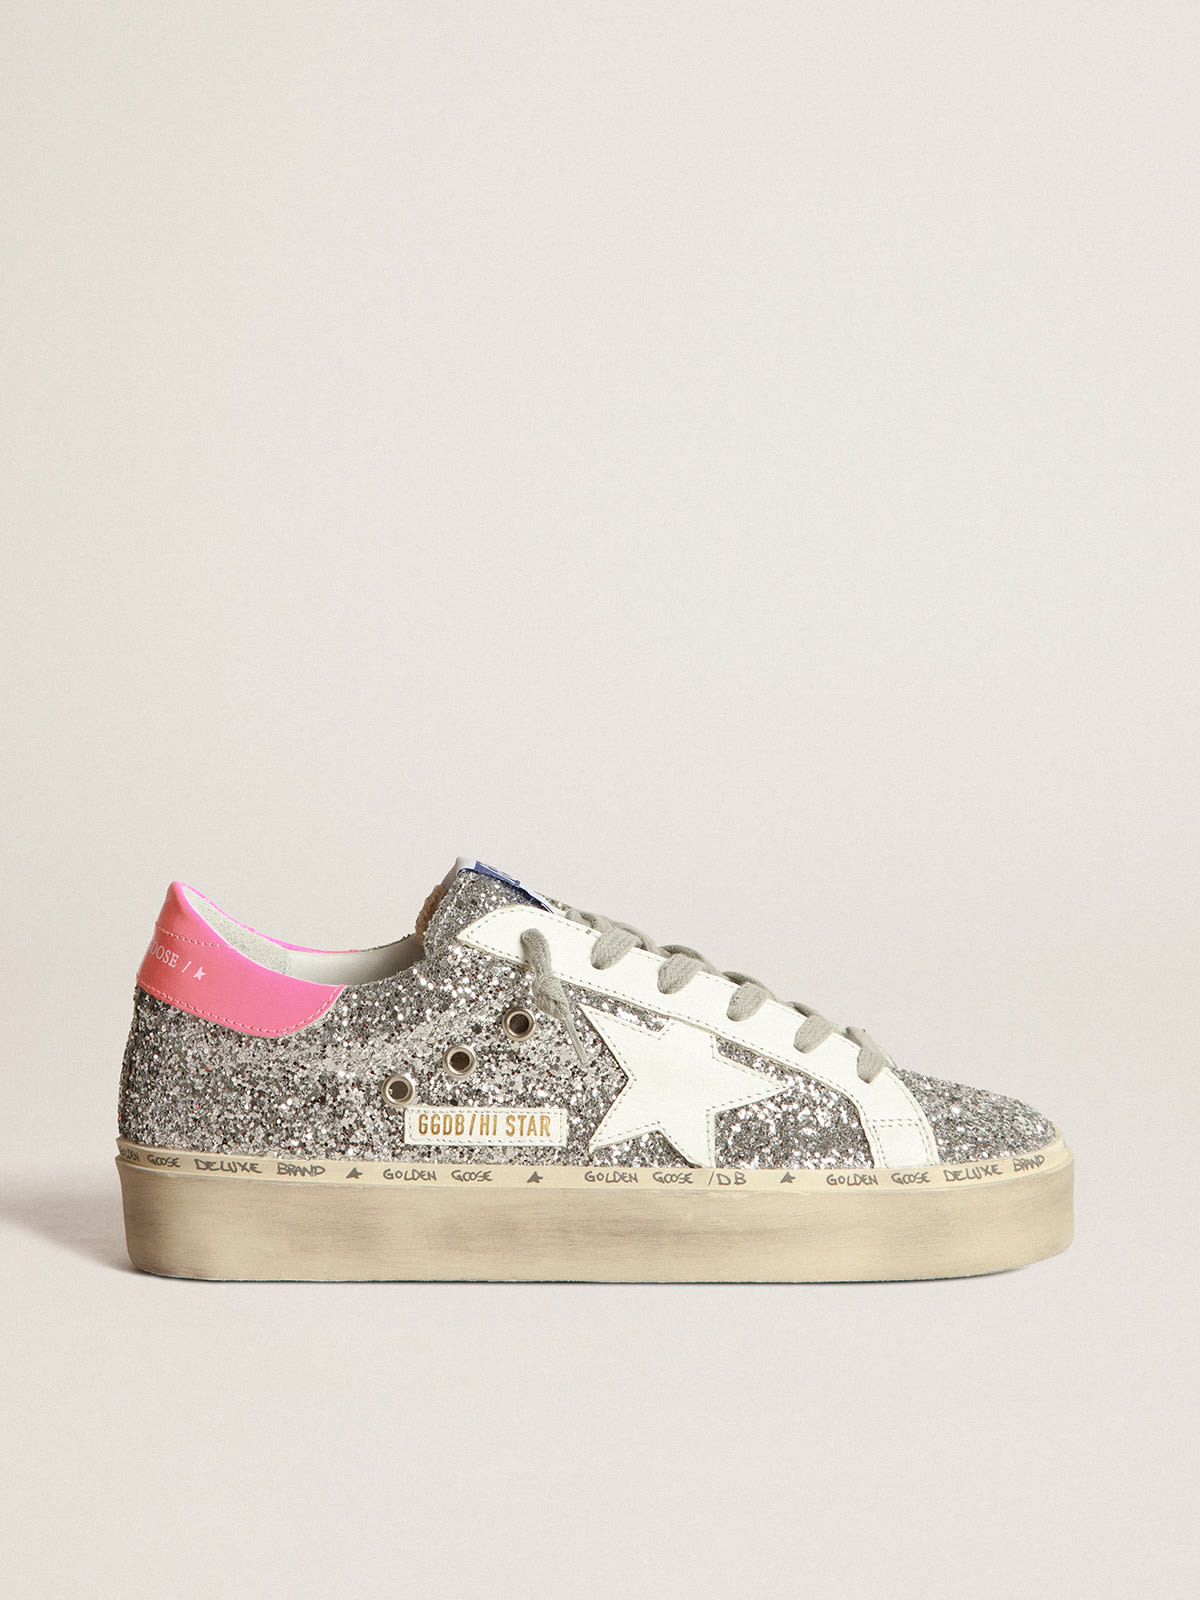 Golden Goose - Hi Star sneakers with silver glitter and fuchsia heel tab in 